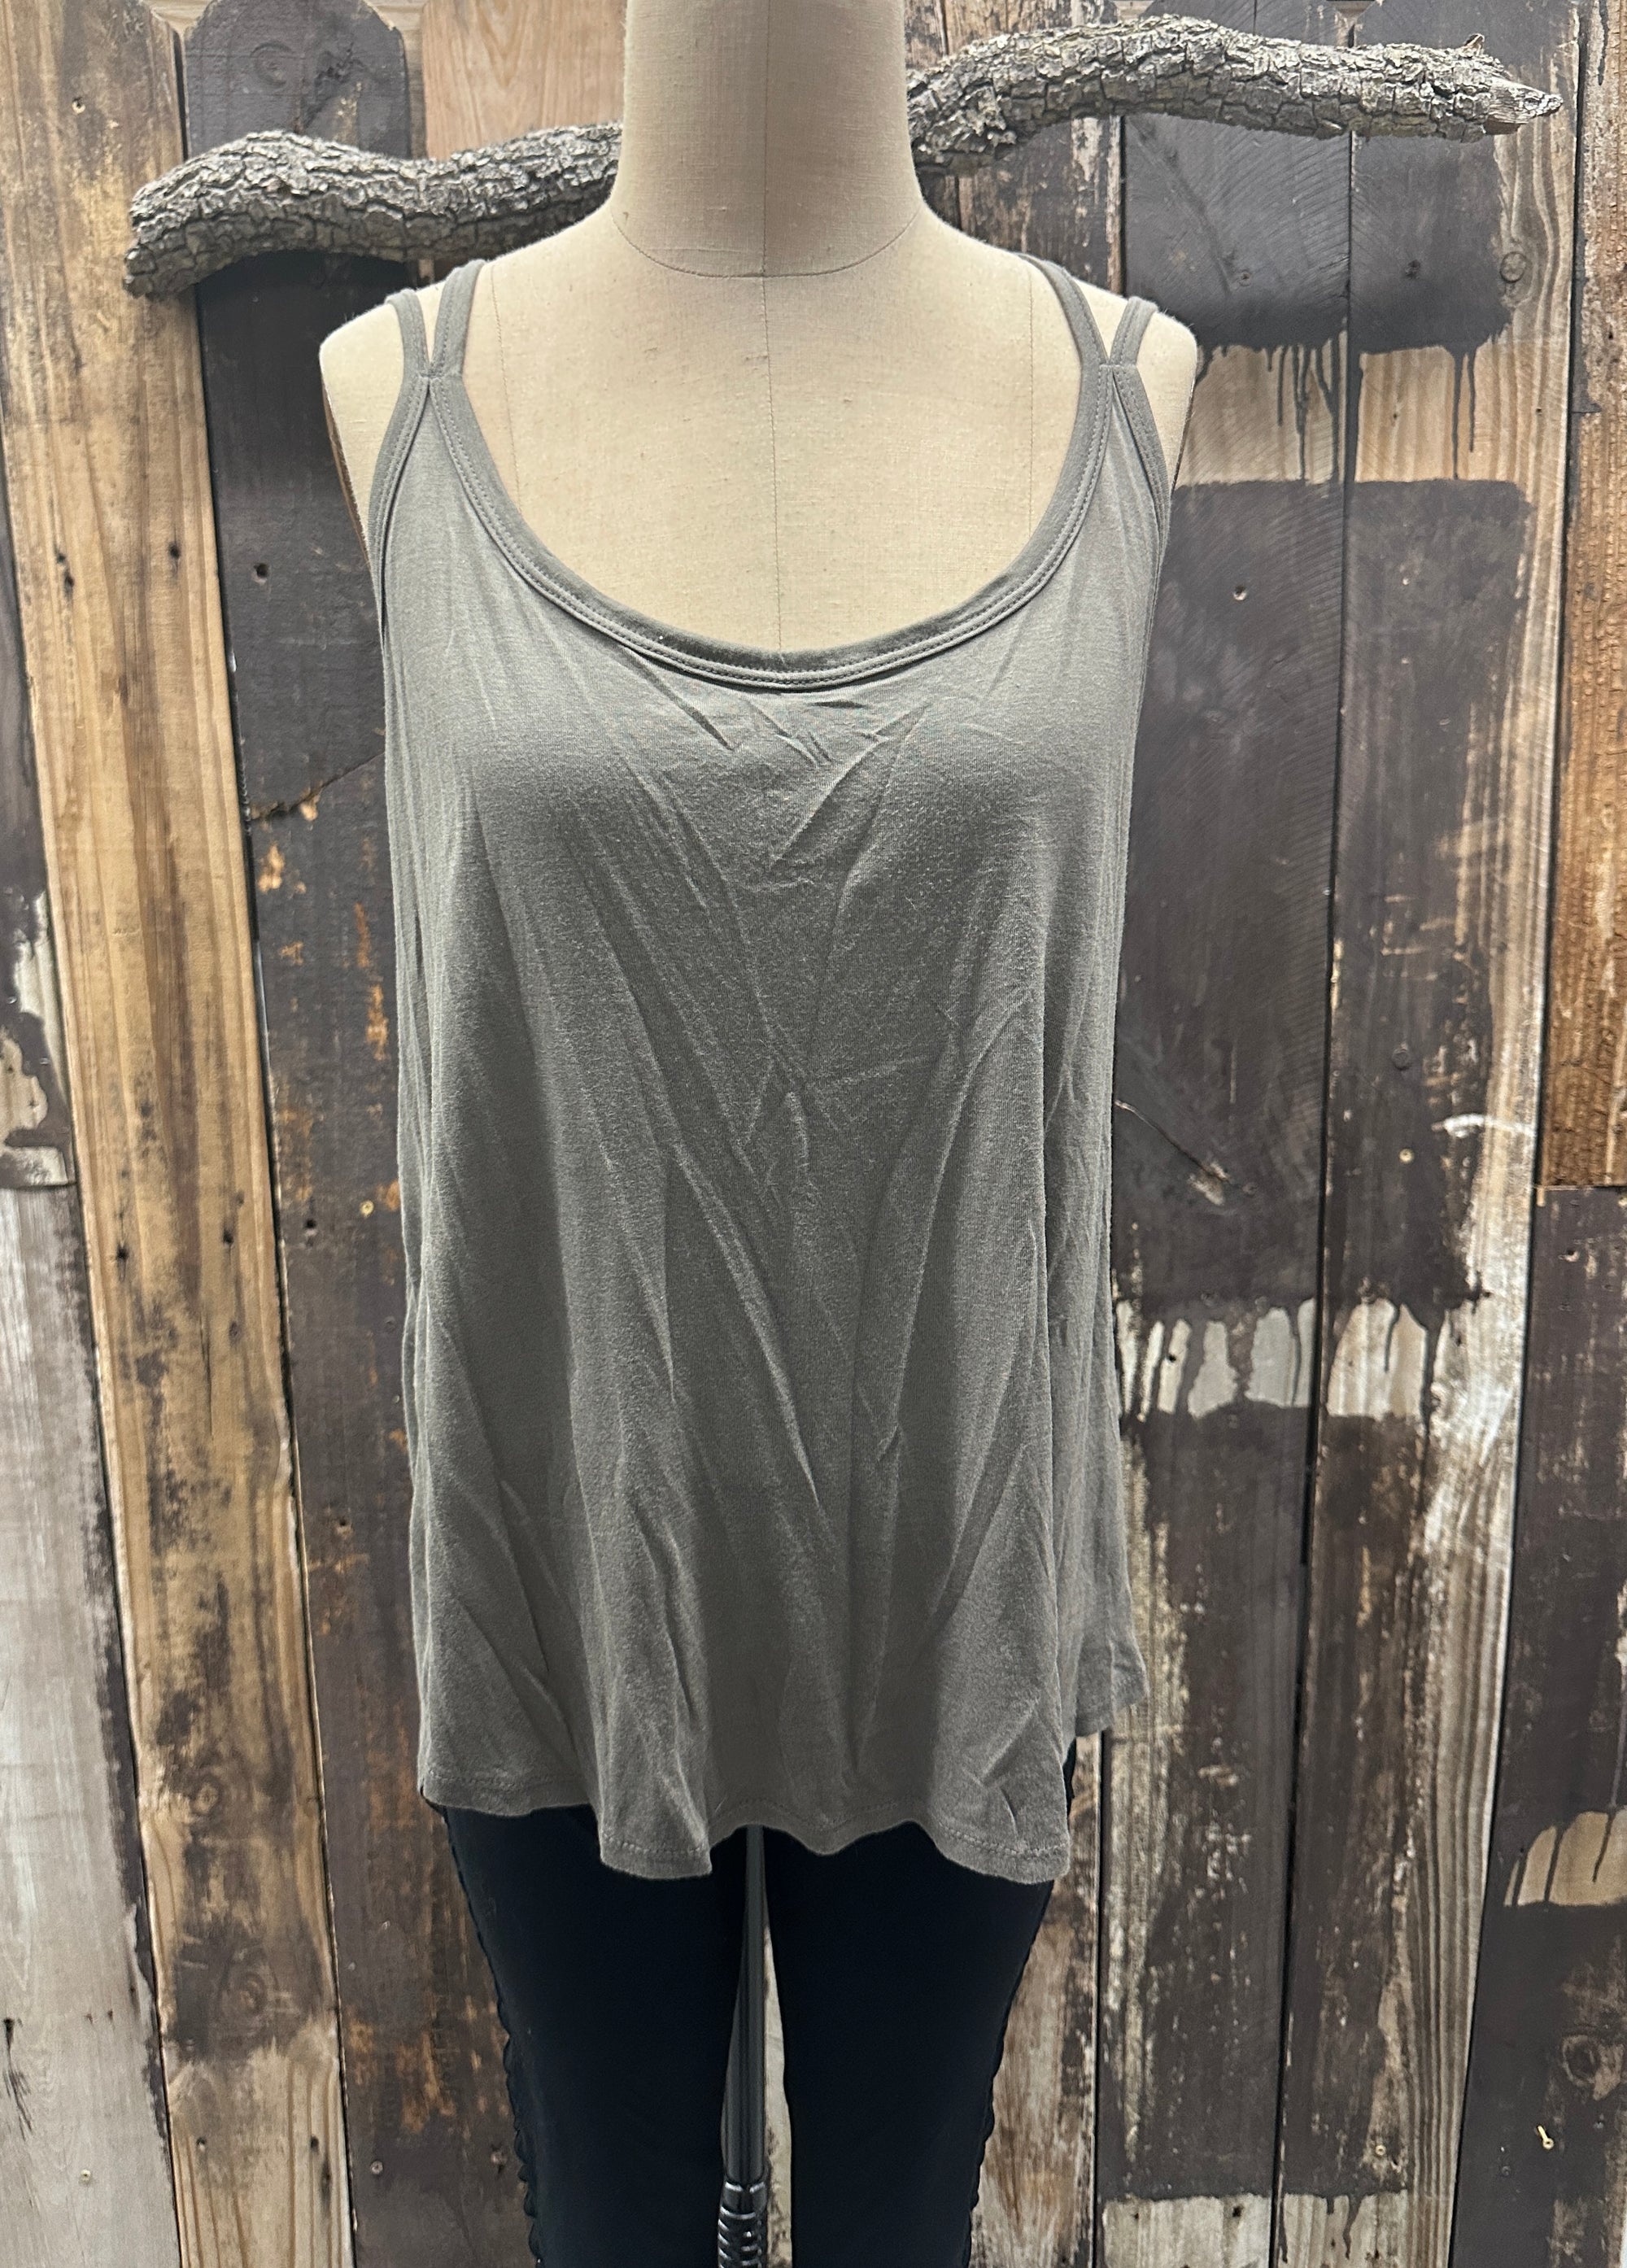 Wet Seal Olive Green OR Sage Criss Cross Tank Top ~ Size XL ~ Queen Bee’s Closet #799